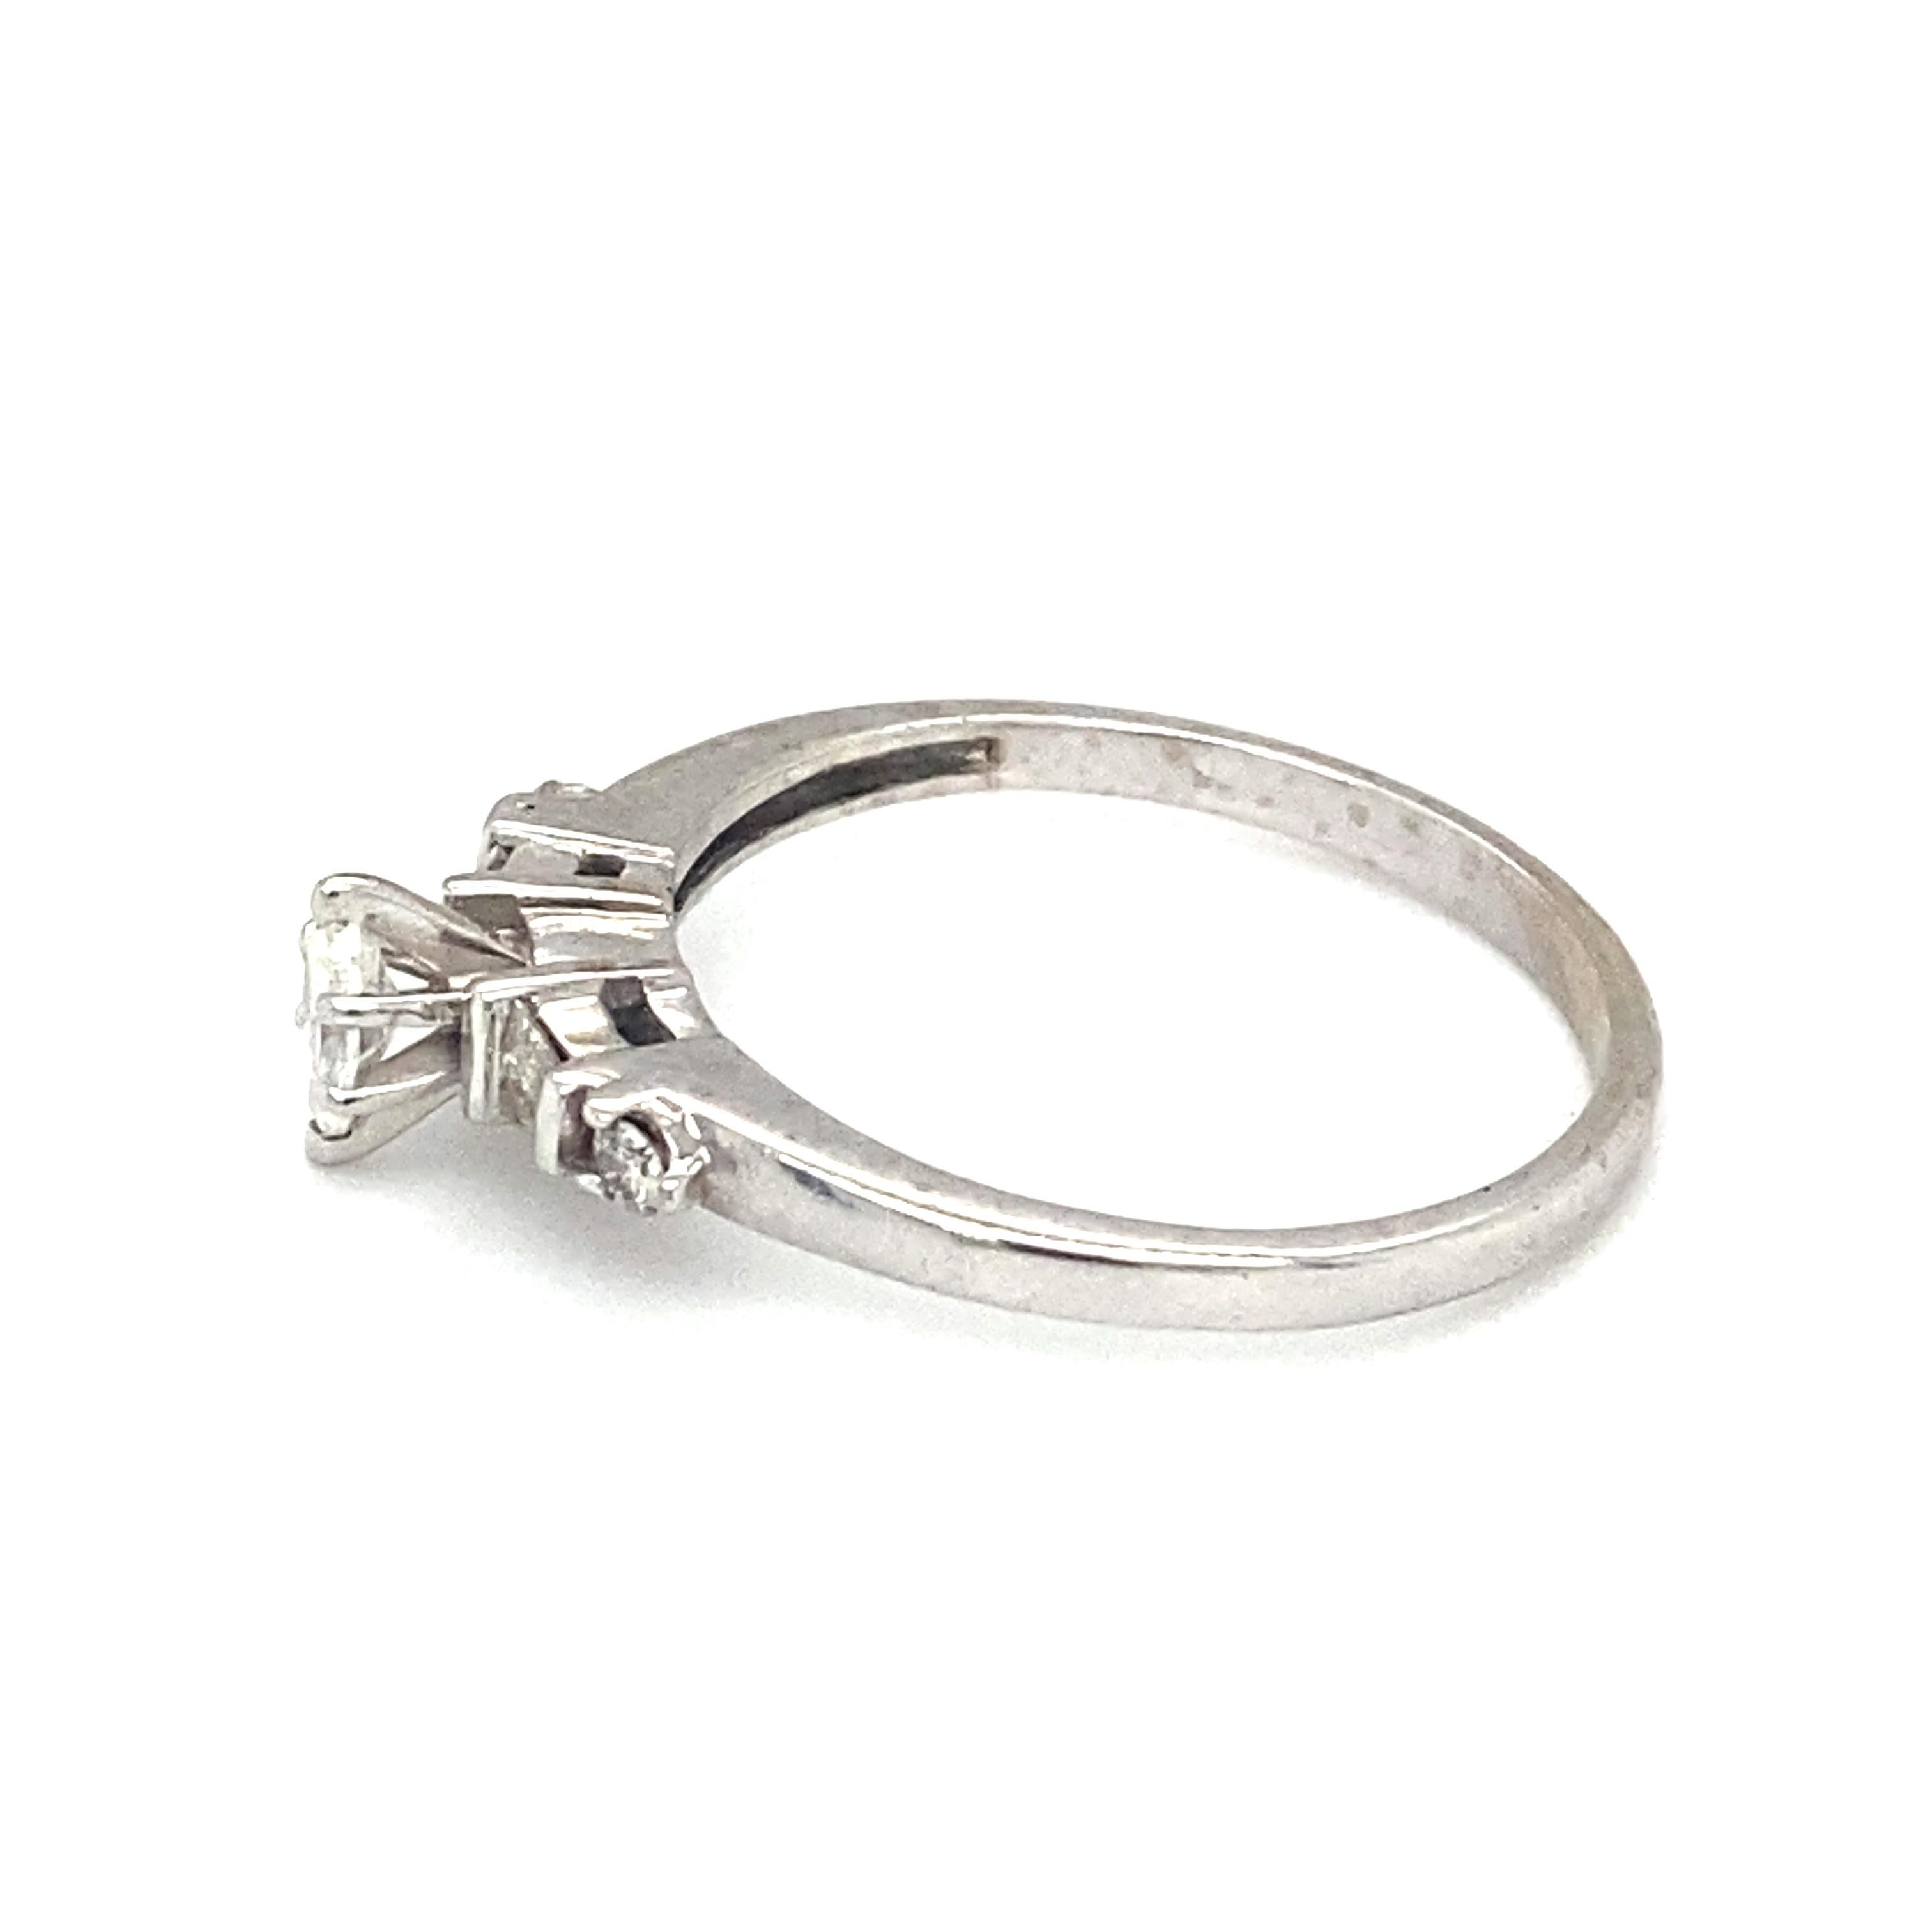 Marquise Cut Circa 1950s 0.25ct Marquise Diamond Engagement Ring in 14K White Gold For Sale